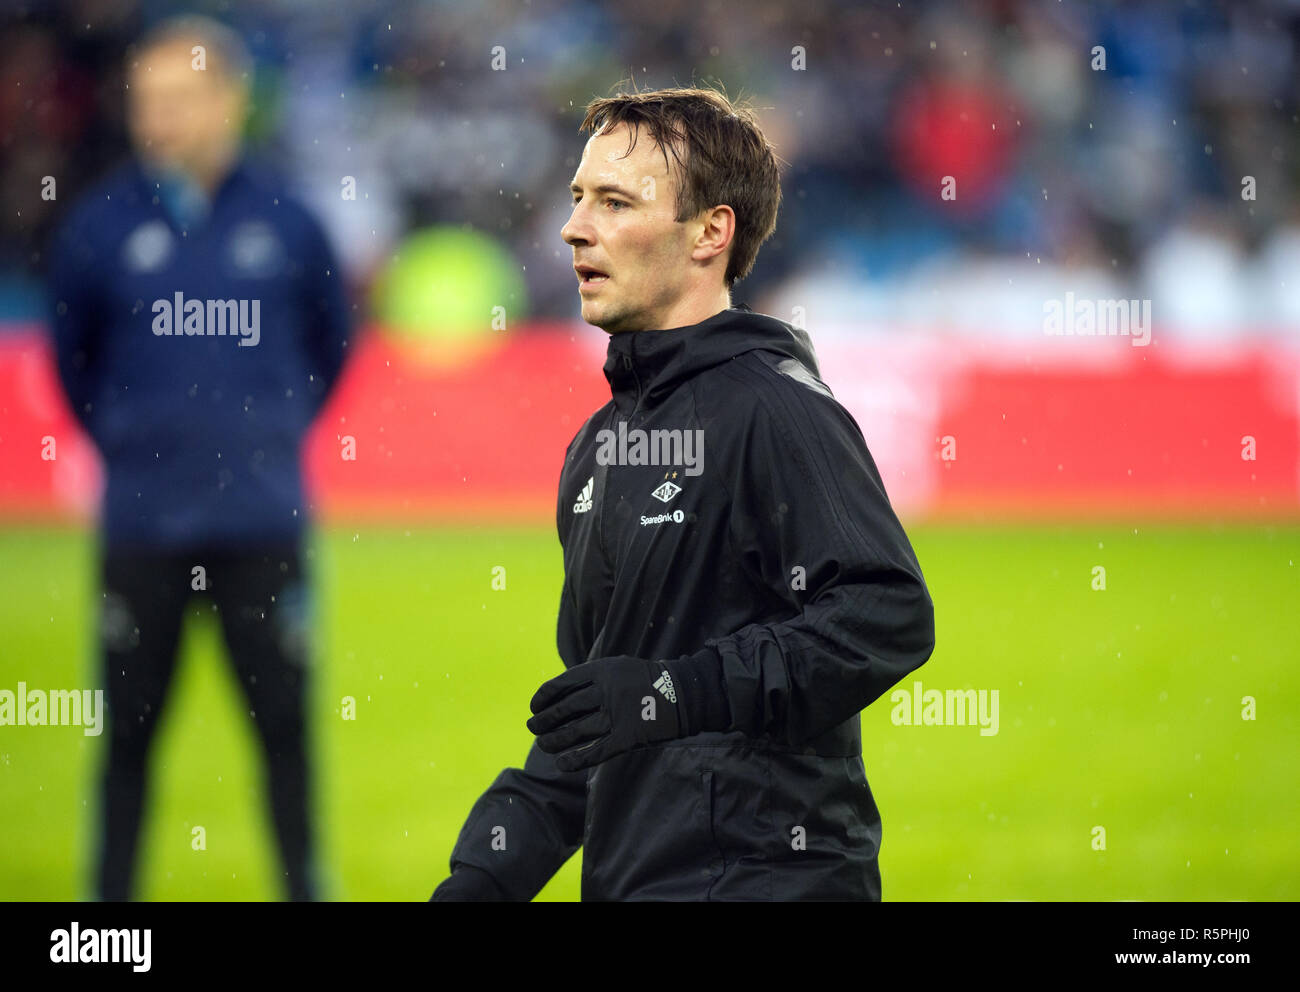 Norway, Oslo. 2nd Dec 2018. Mike Jensen of Rosenborg seen during the warm-up before the Norwegian Cup Final 2018 between Rosenborg and Strømsgodset at Ullevaal Stadion in Oslo. (Photo credit: Gonzales Photo - Jan-Erik Eriksen). Credit: Gonzales Photo/Alamy Live News Stock Photo